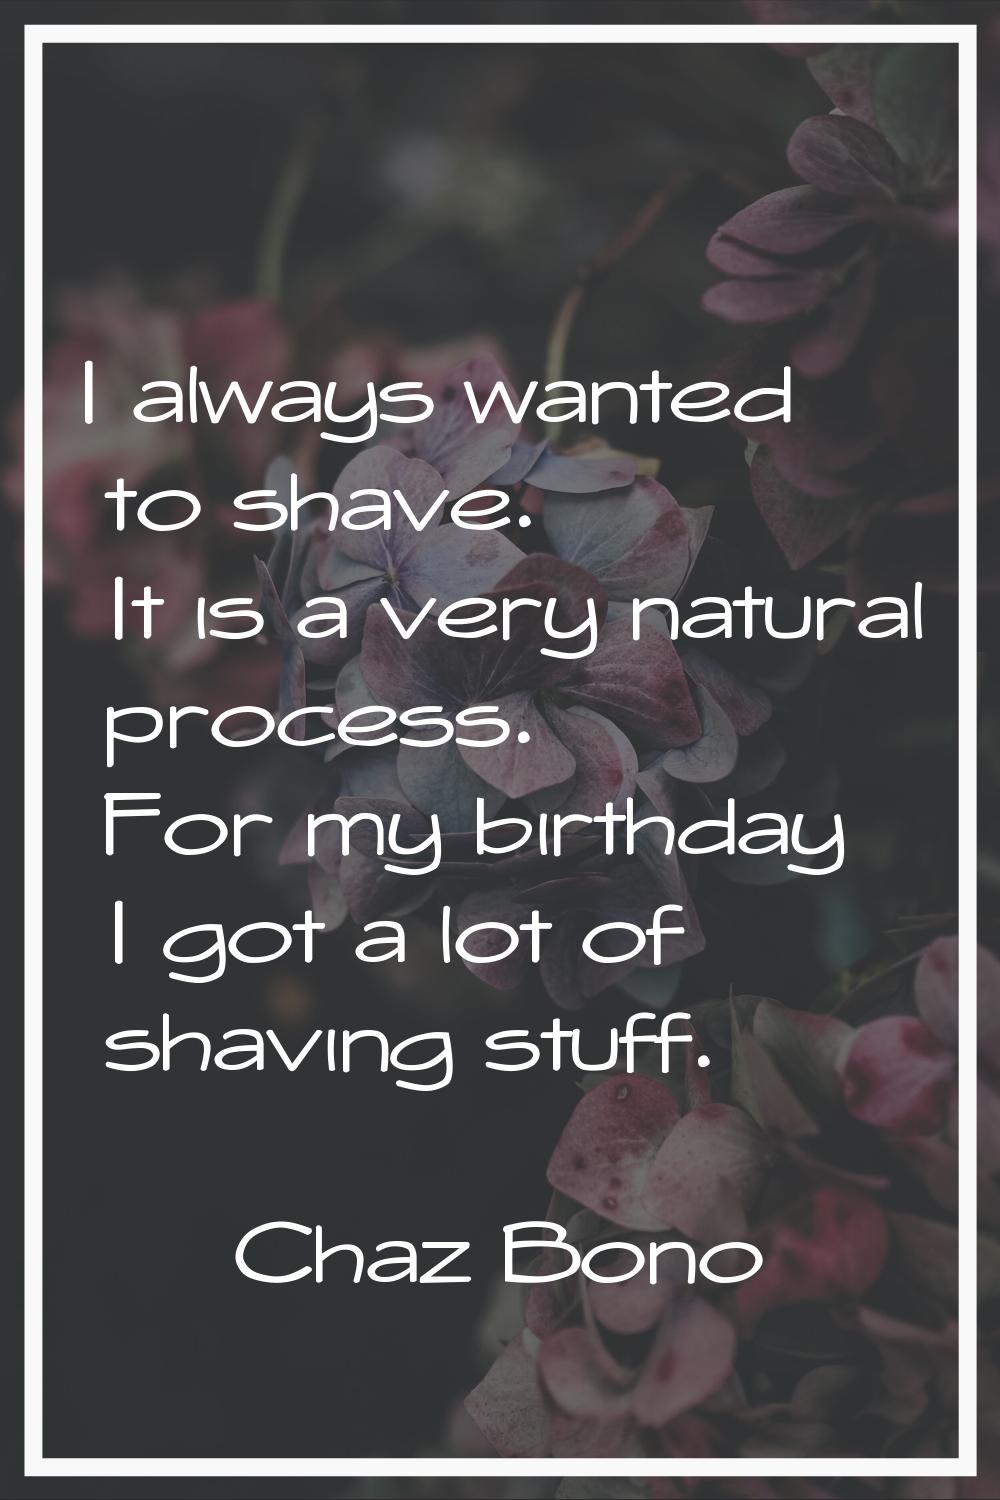 I always wanted to shave. It is a very natural process. For my birthday I got a lot of shaving stuf